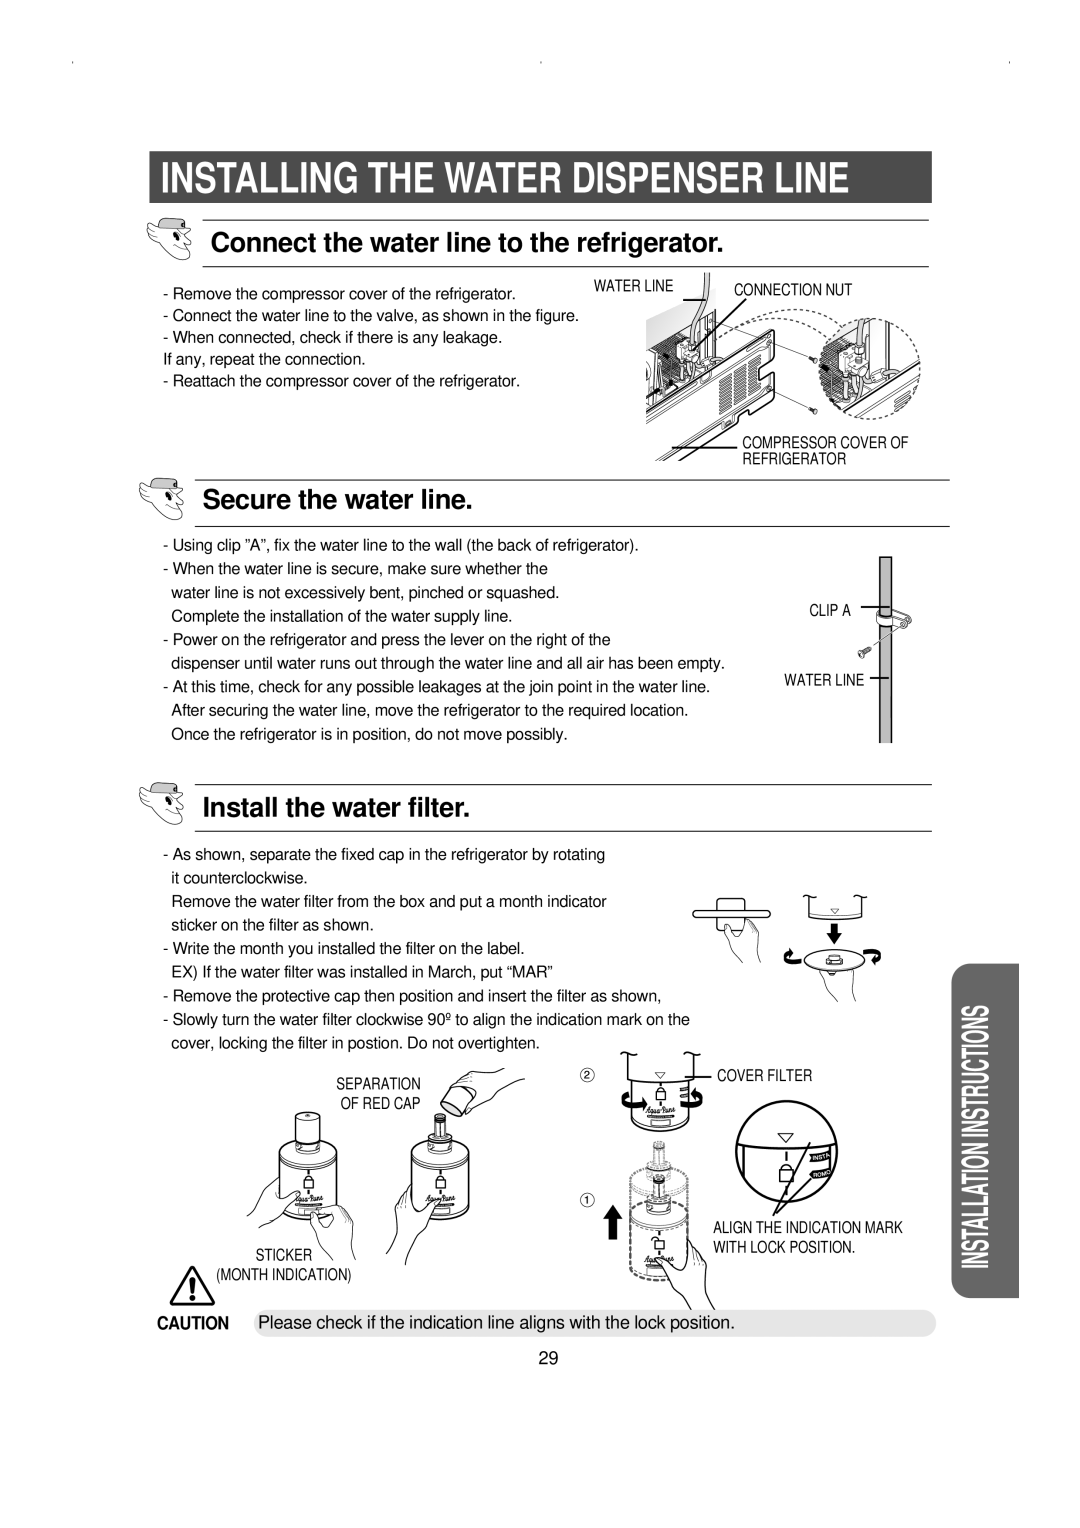 Samsung RS23KCSW owner manual Installing The Water Dispenser Line, Secure the water line, Install the water filter 